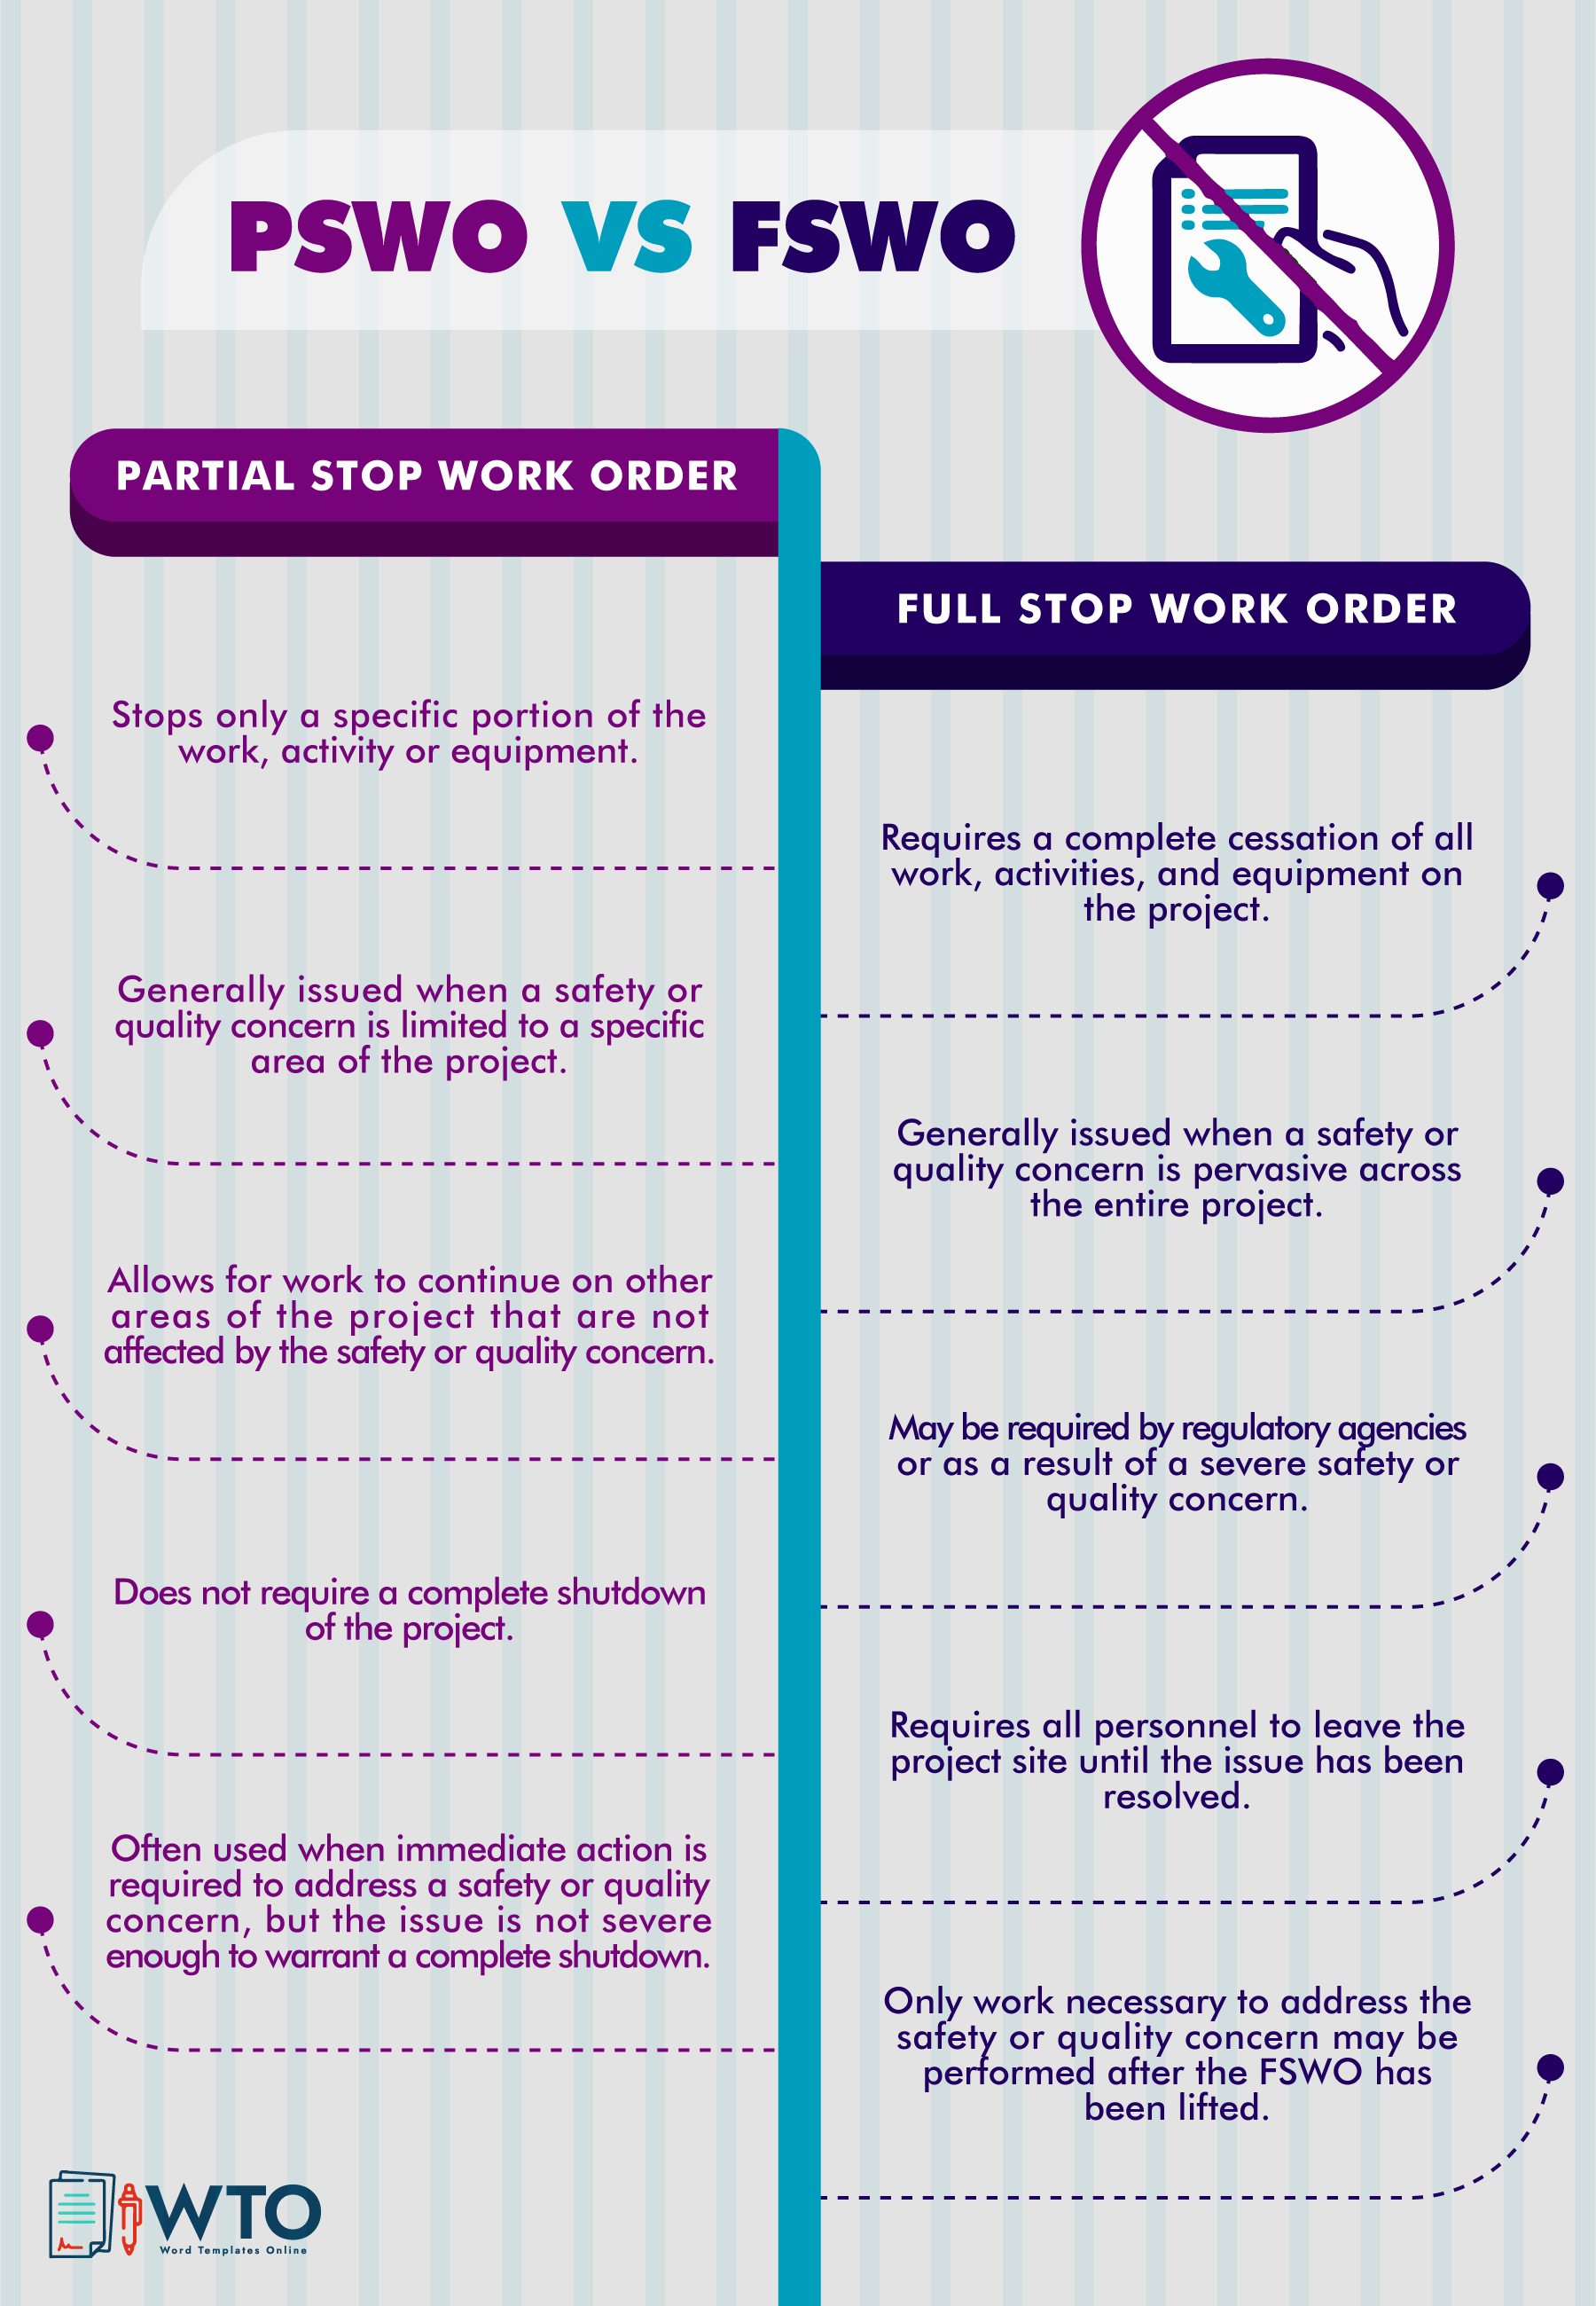 This infographic is about partial and full stop work order.